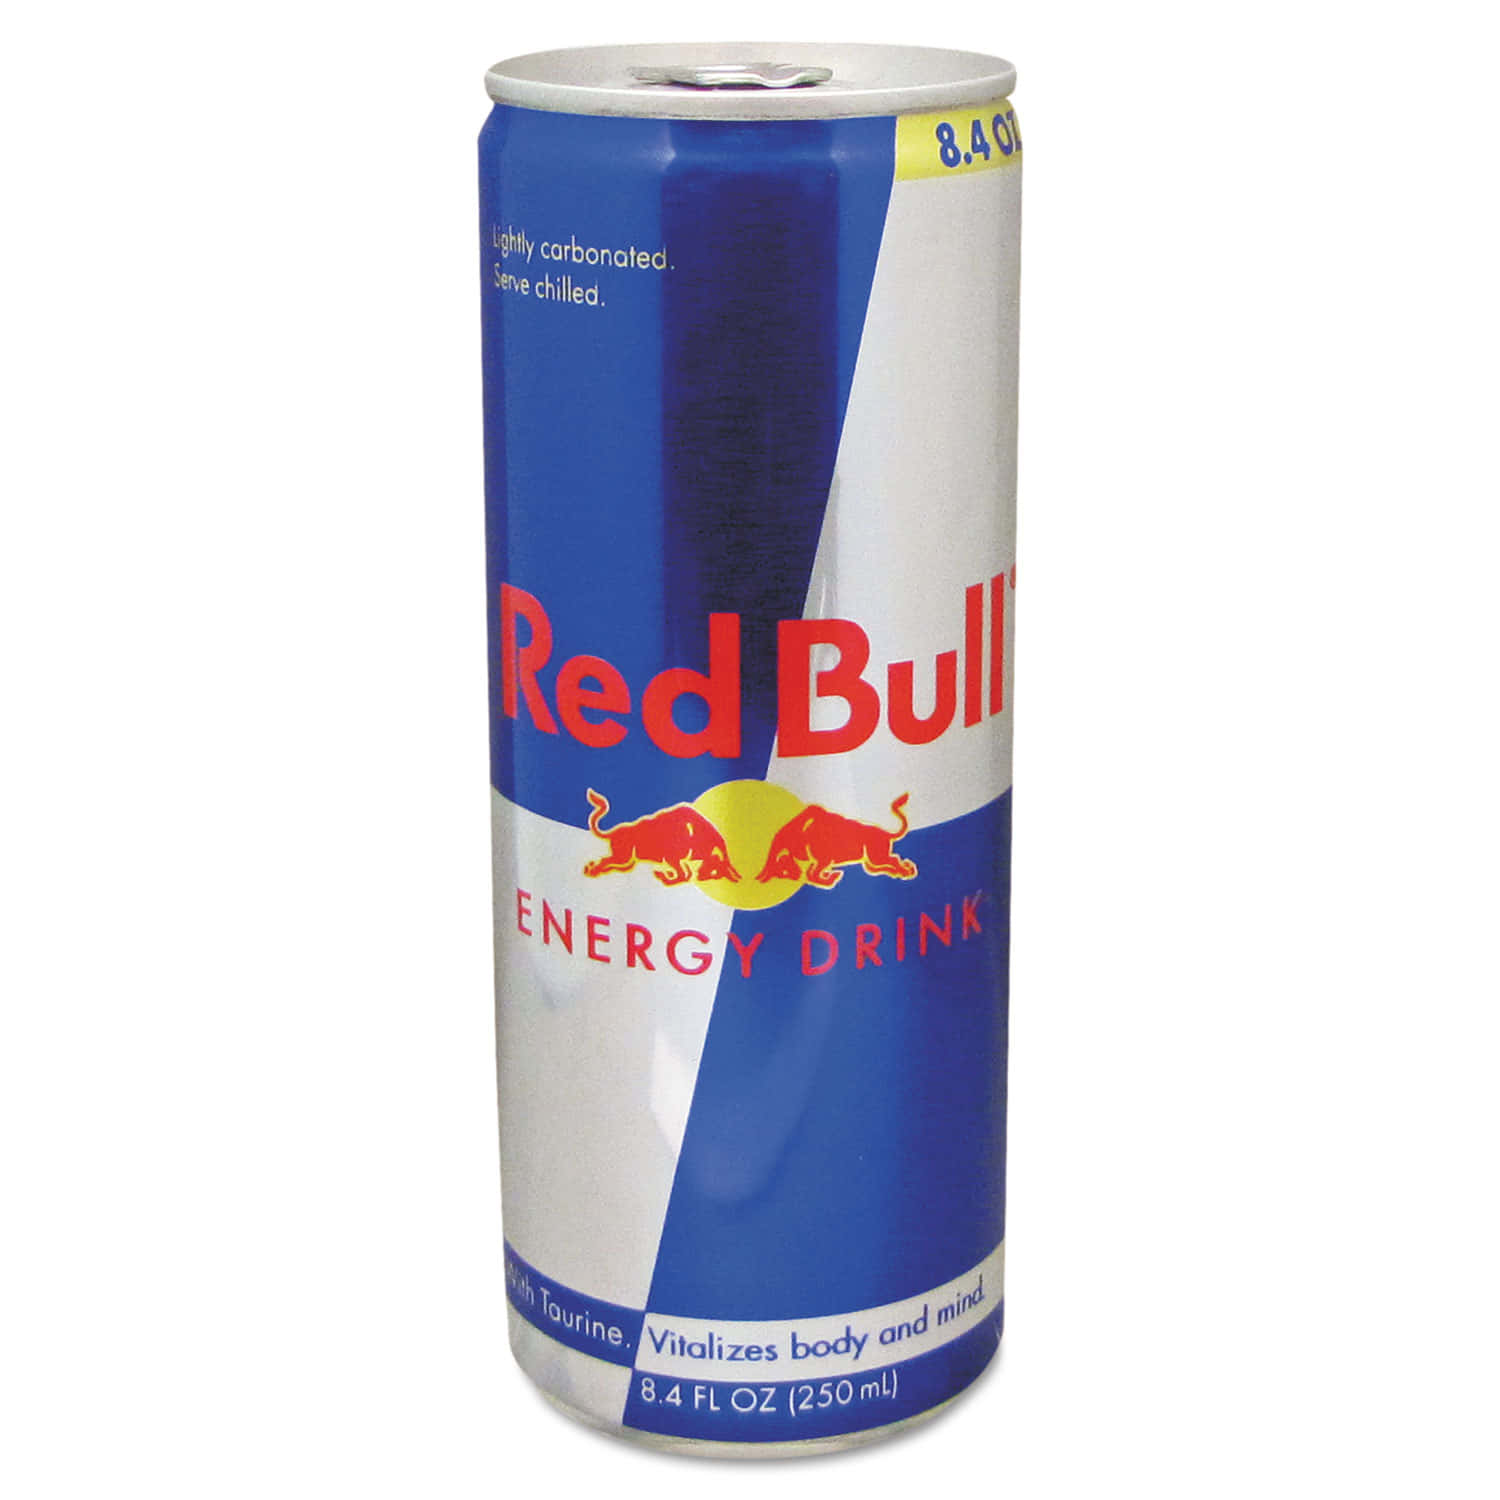 "Red Bull - Take Flight with Energy that Lasts"